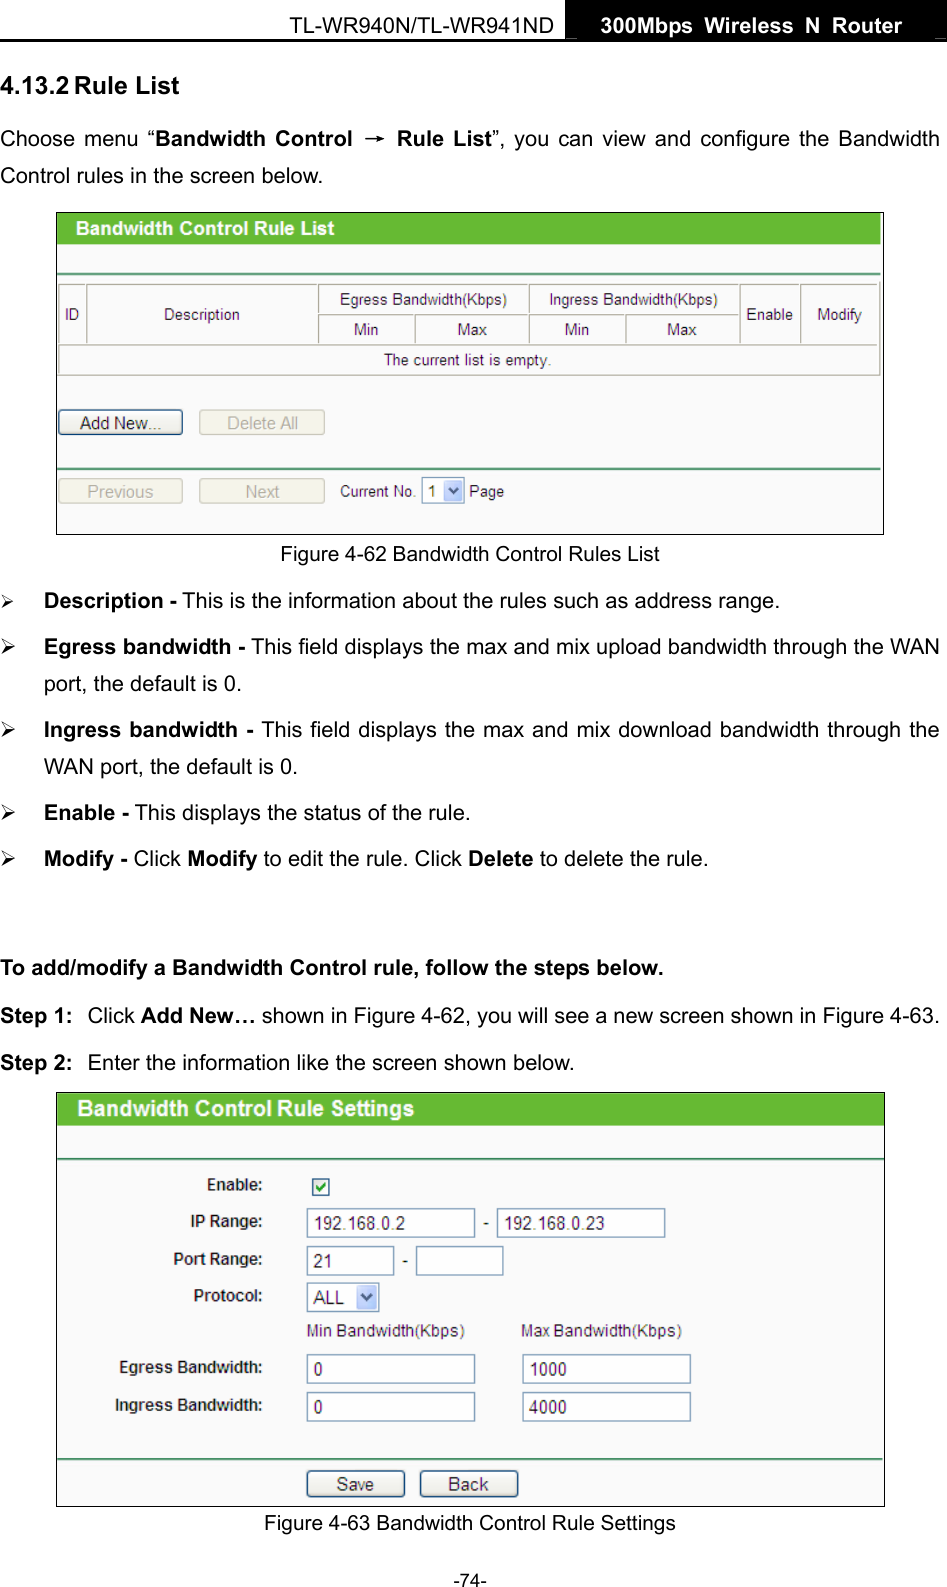   300Mbps Wireless N Router  TL-WR940N/TL-WR941ND -74- 4.13.2 Rule List Choose menu “Bandwidth Control → Rule List”, you can view and configure the Bandwidth Control rules in the screen below.  Figure 4-62 Bandwidth Control Rules List ¾ Description - This is the information about the rules such as address range. ¾ Egress bandwidth - This field displays the max and mix upload bandwidth through the WAN port, the default is 0. ¾ Ingress bandwidth - This field displays the max and mix download bandwidth through the WAN port, the default is 0. ¾ Enable - This displays the status of the rule. ¾ Modify - Click Modify to edit the rule. Click Delete to delete the rule.  To add/modify a Bandwidth Control rule, follow the steps below. Step 1:  Click Add New… shown in Figure 4-62, you will see a new screen shown in Figure 4-63. Step 2:  Enter the information like the screen shown below.  Figure 4-63 Bandwidth Control Rule Settings 